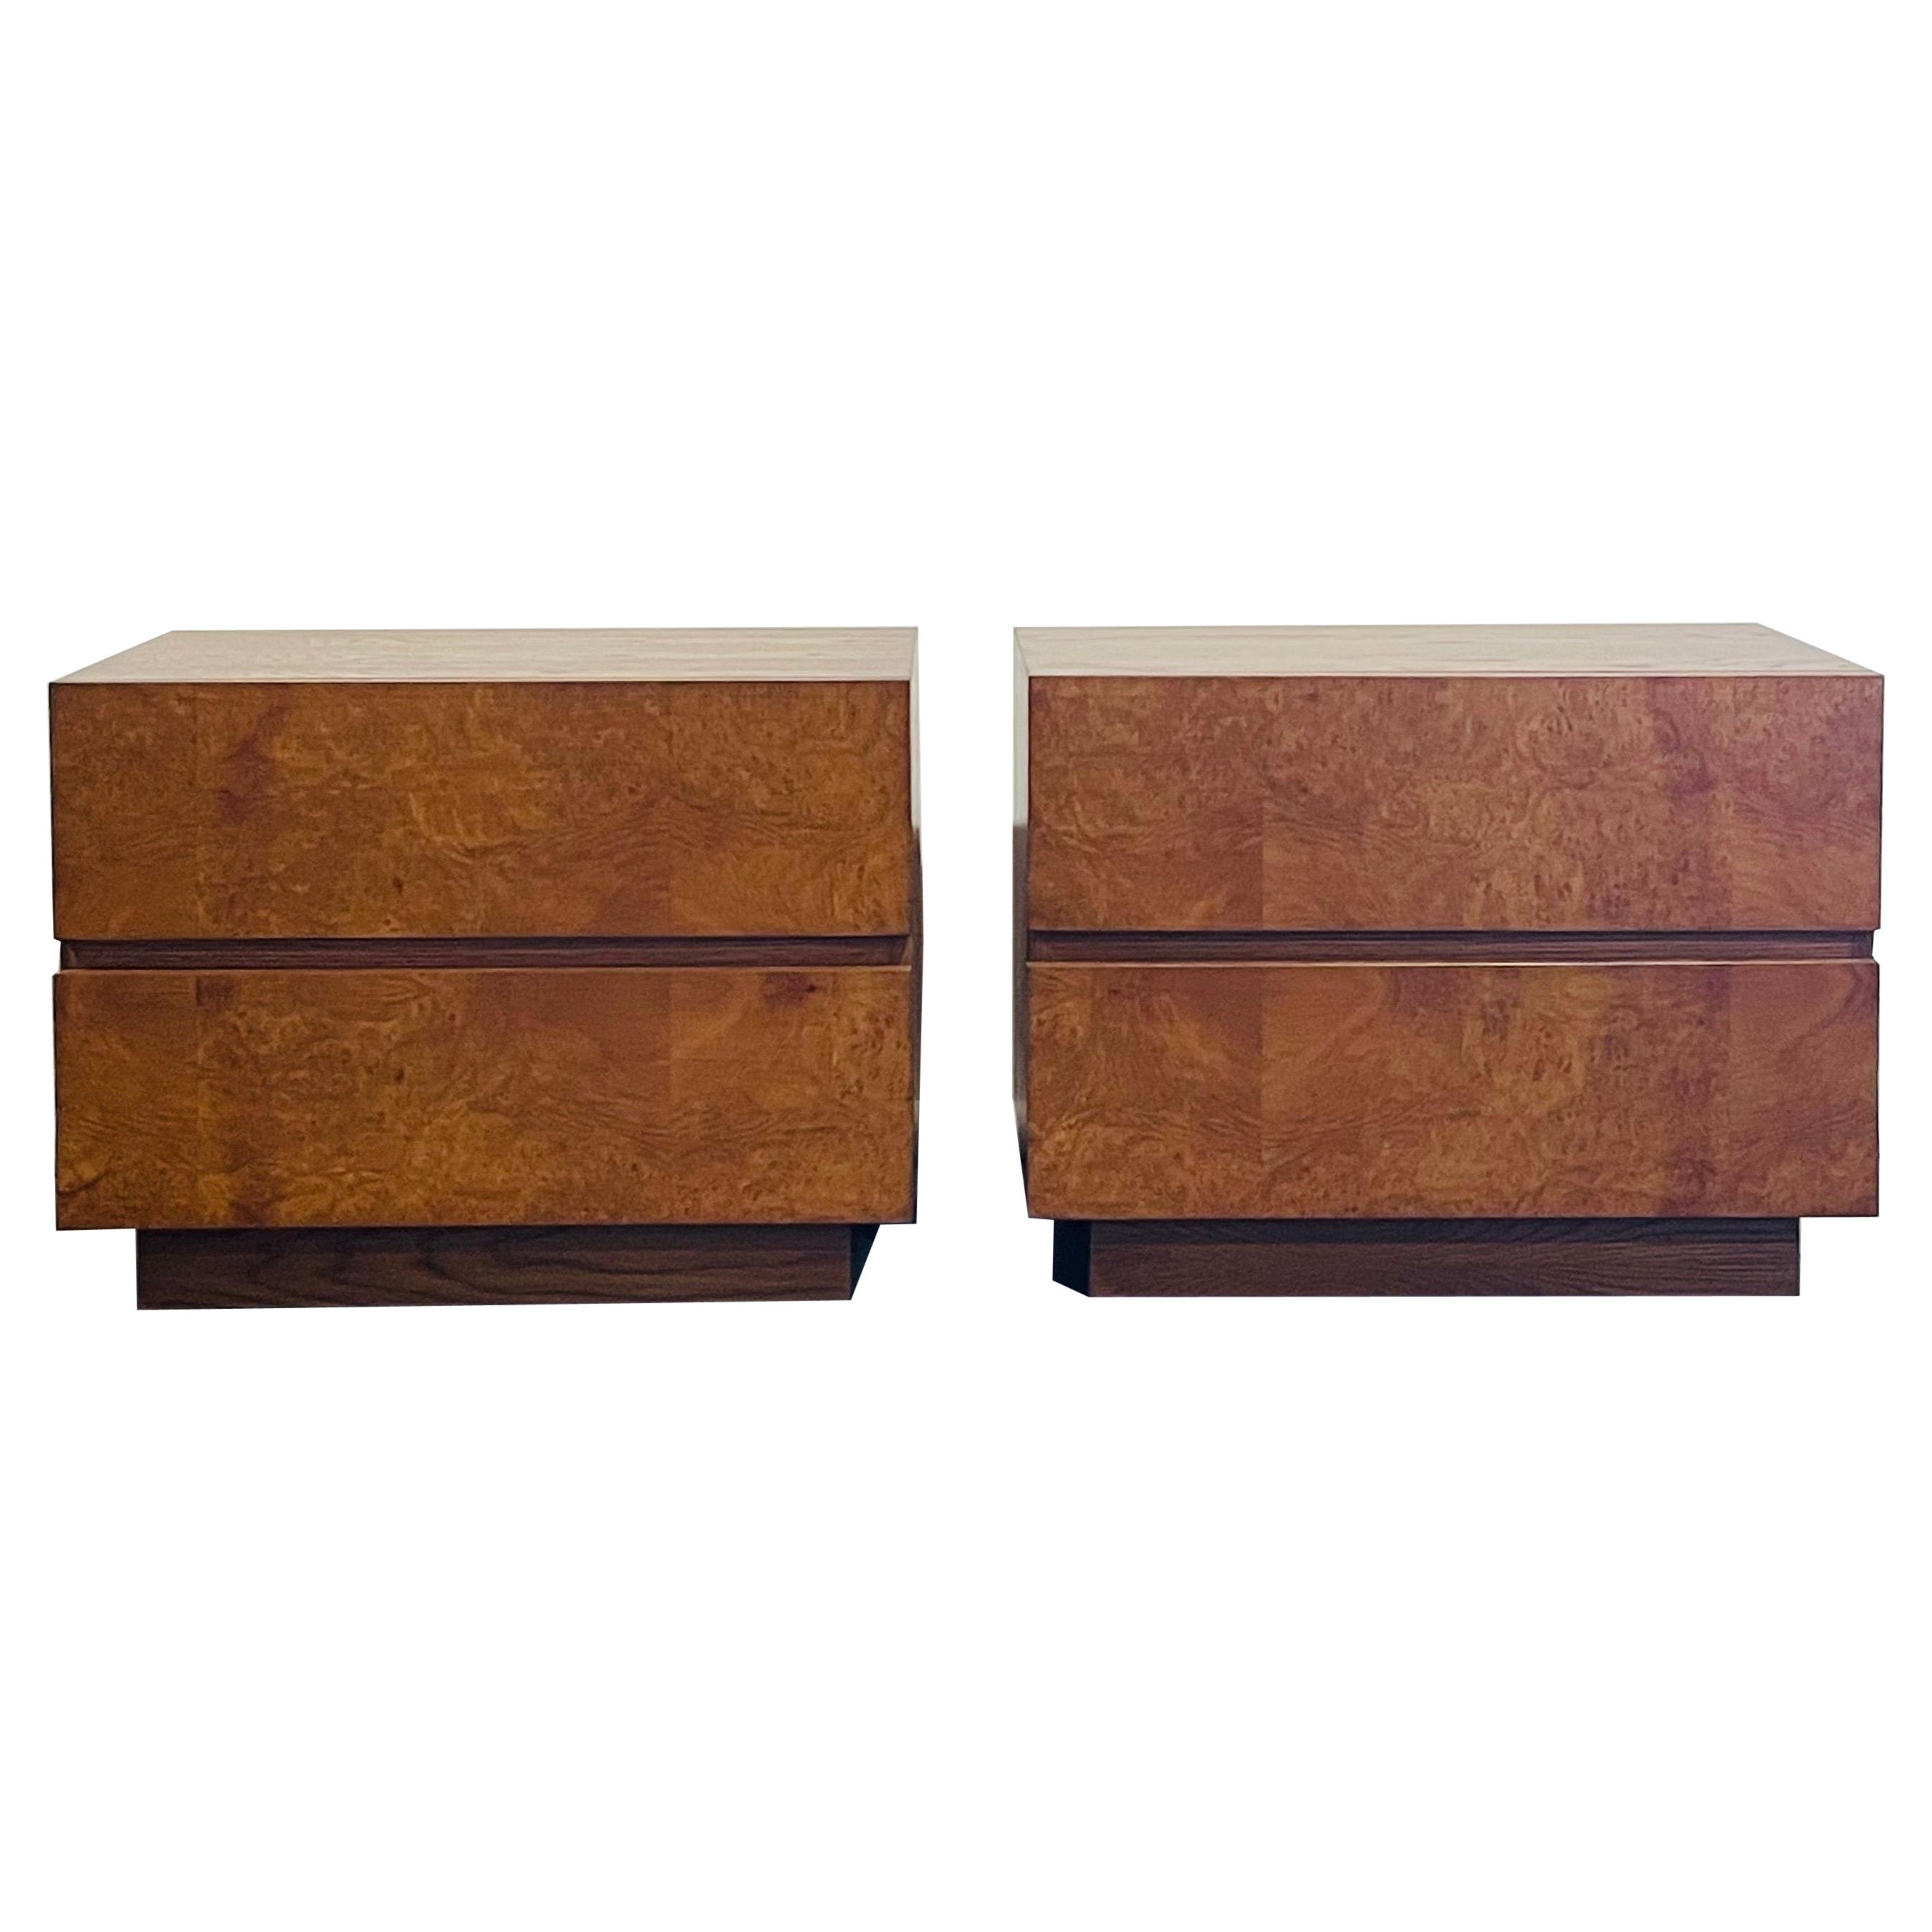 Pair of 'Amboine' Burl Wood Night Stands by Design Frères